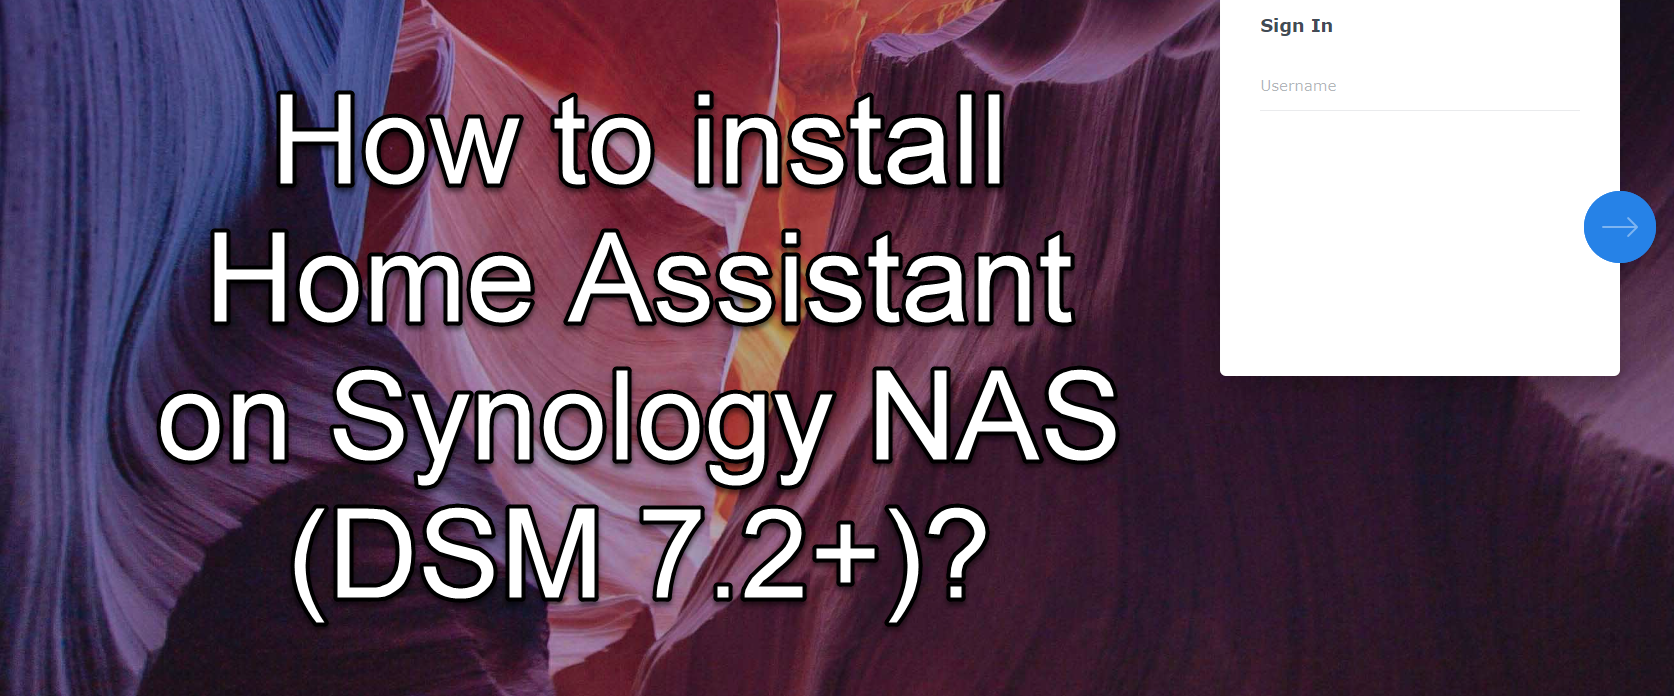 How to install Home Assistant on Synology NAS (DSM 7.2)?